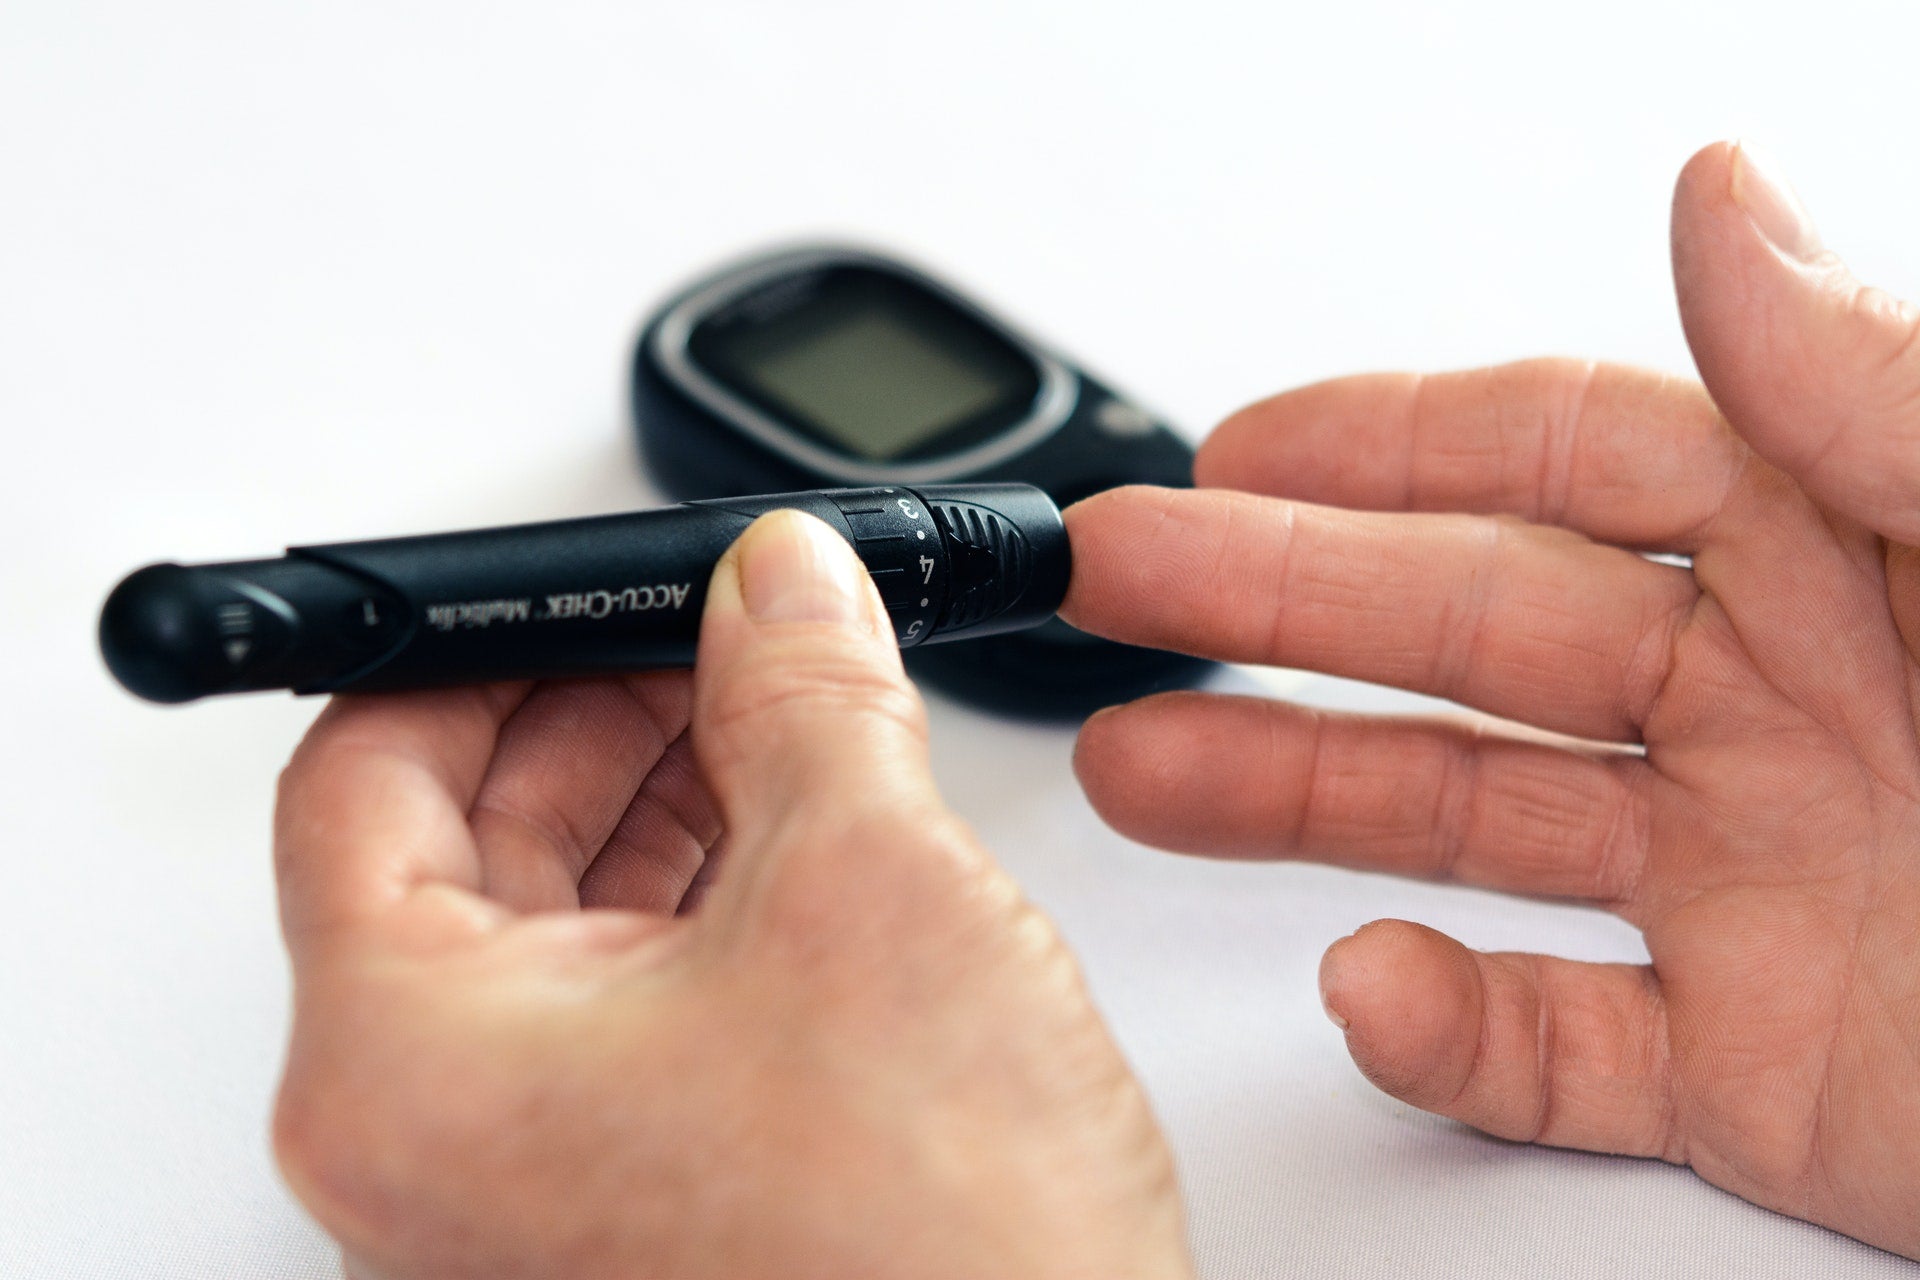 Intermittent Fasting Works For Weight Loss. But Is It Safe If You Have Diabetes?